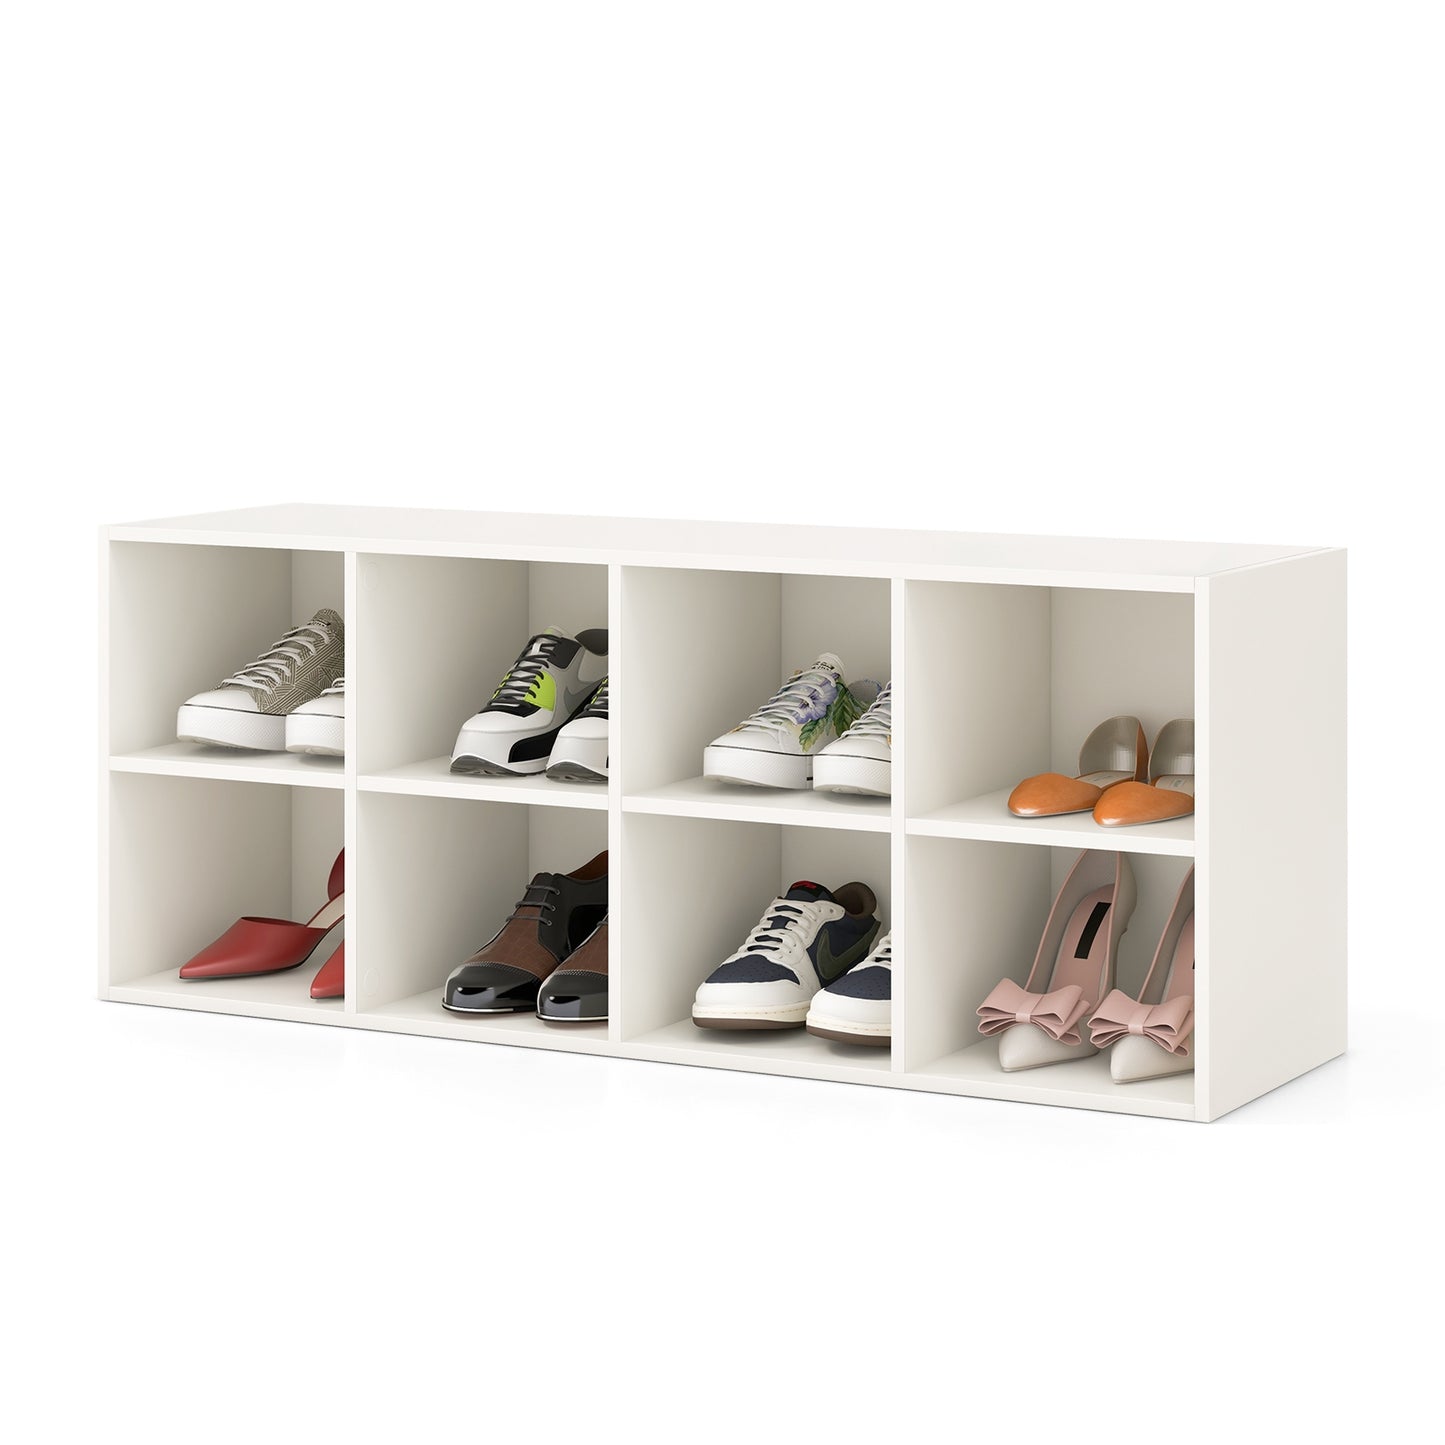 8 Cubbies Shoe Organizer with 500 LBS Weight Capacity-White